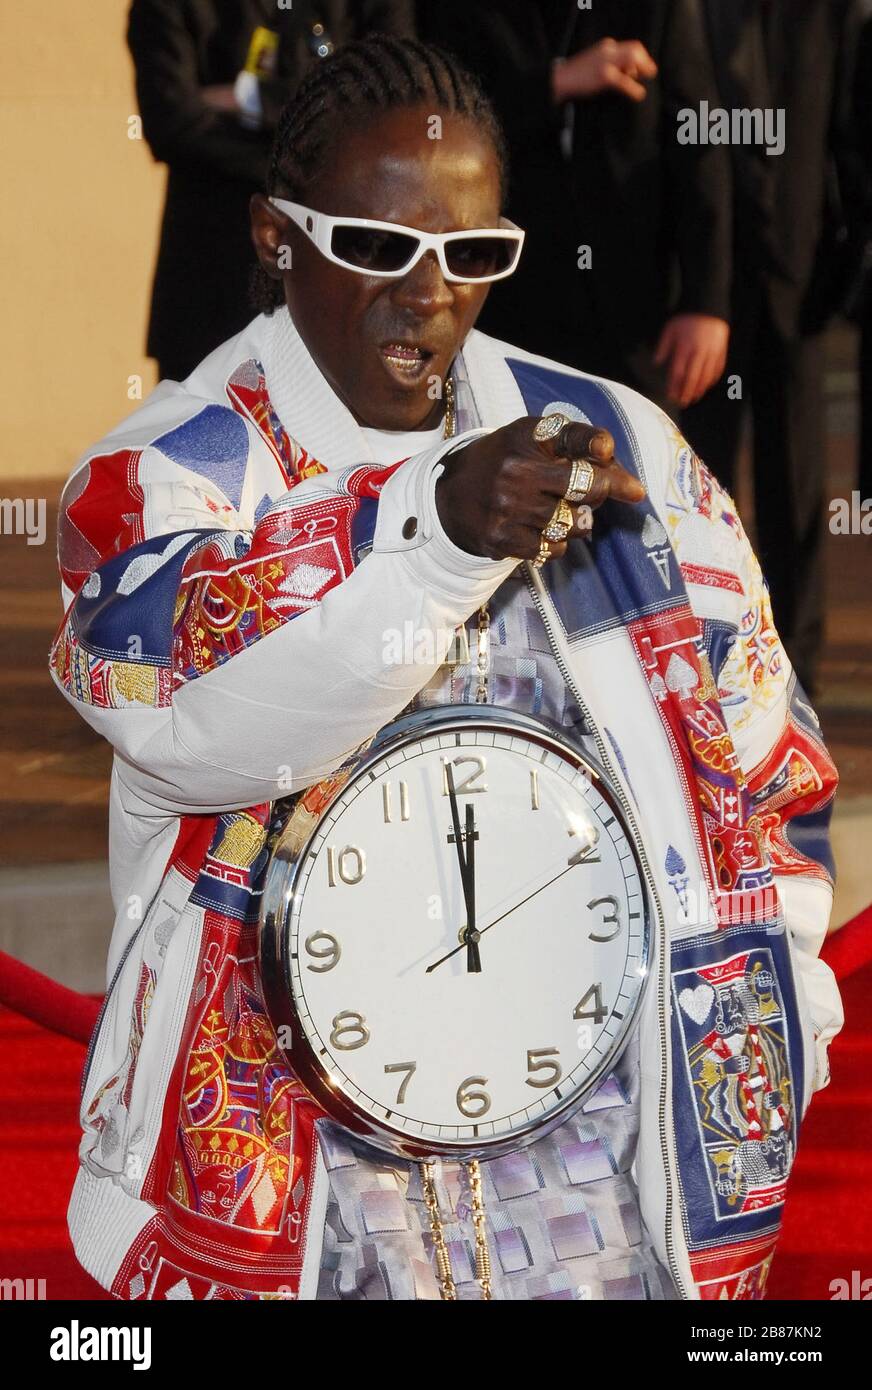 Flavor Flav at the 34th Annual American Music Awards held at the Shrine Auditorium in Los Angeles, CA. The event took place on Tuesday, November 21, 2006.  Photo by: SBM / PictureLux - File Reference # 33984-9586SBMPLX Stock Photo